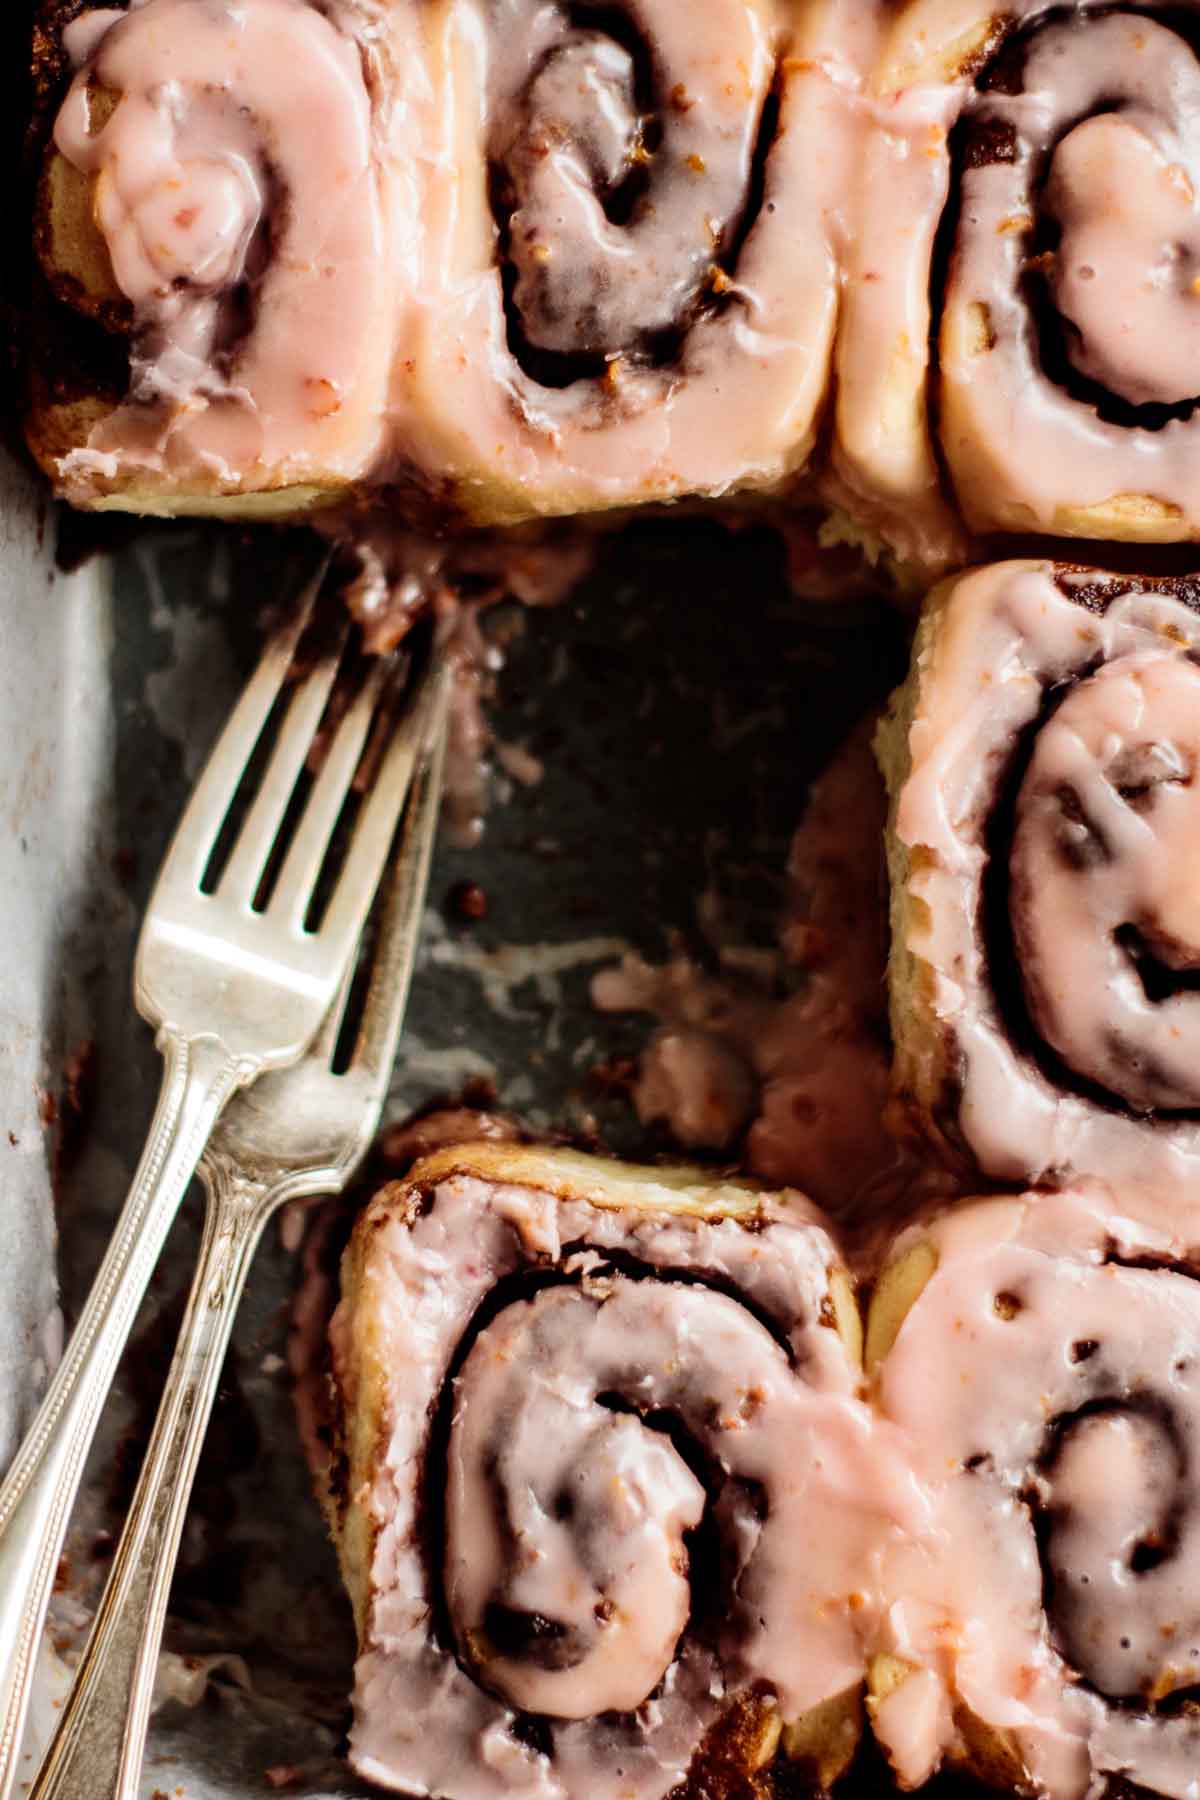 Blood orange cinnamon rolls with pink glaze and two forks on a baking pan.